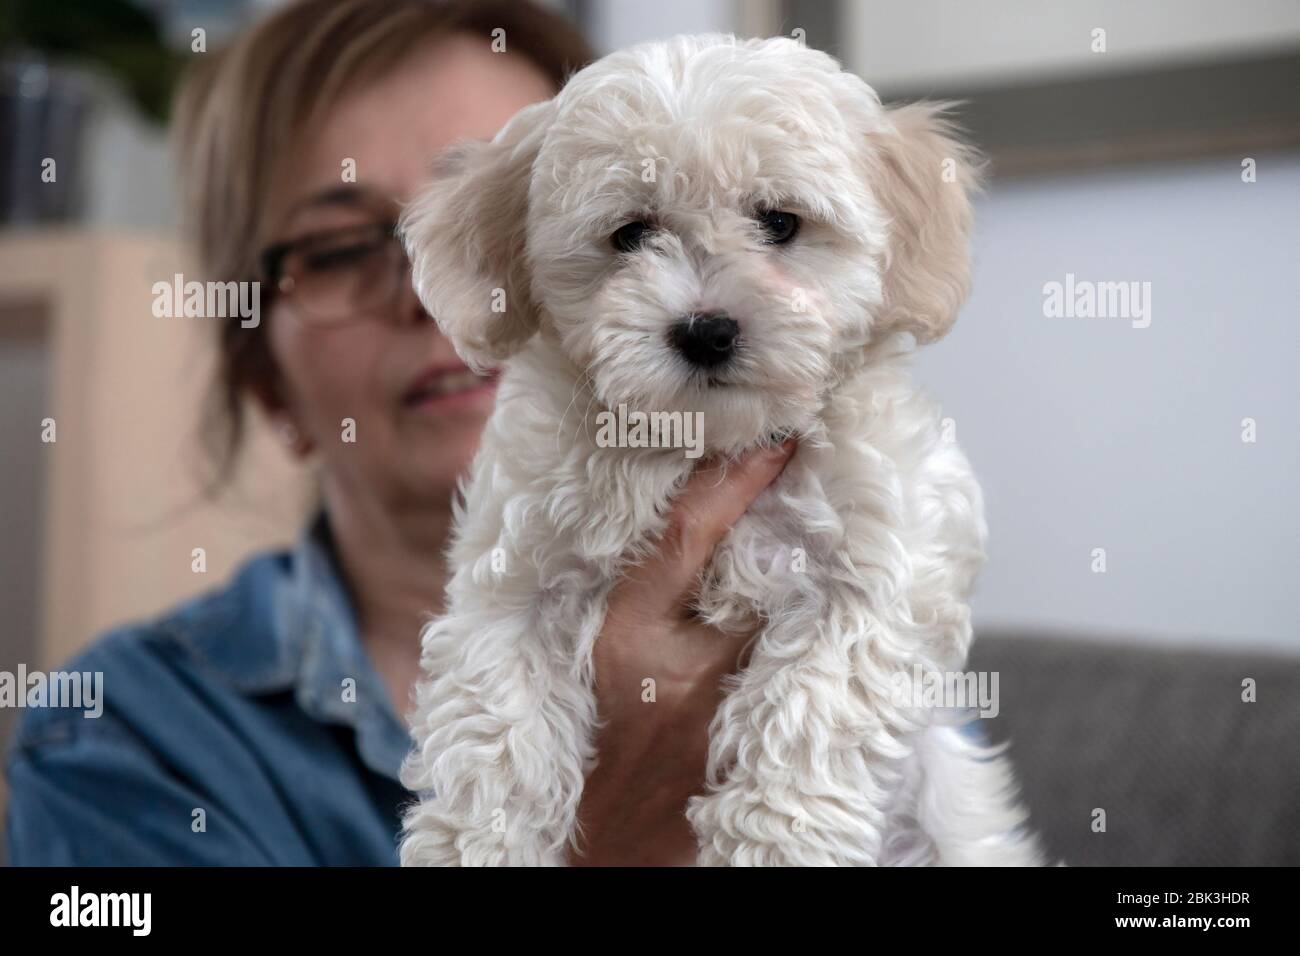 Woman holding puppy Stock Photo